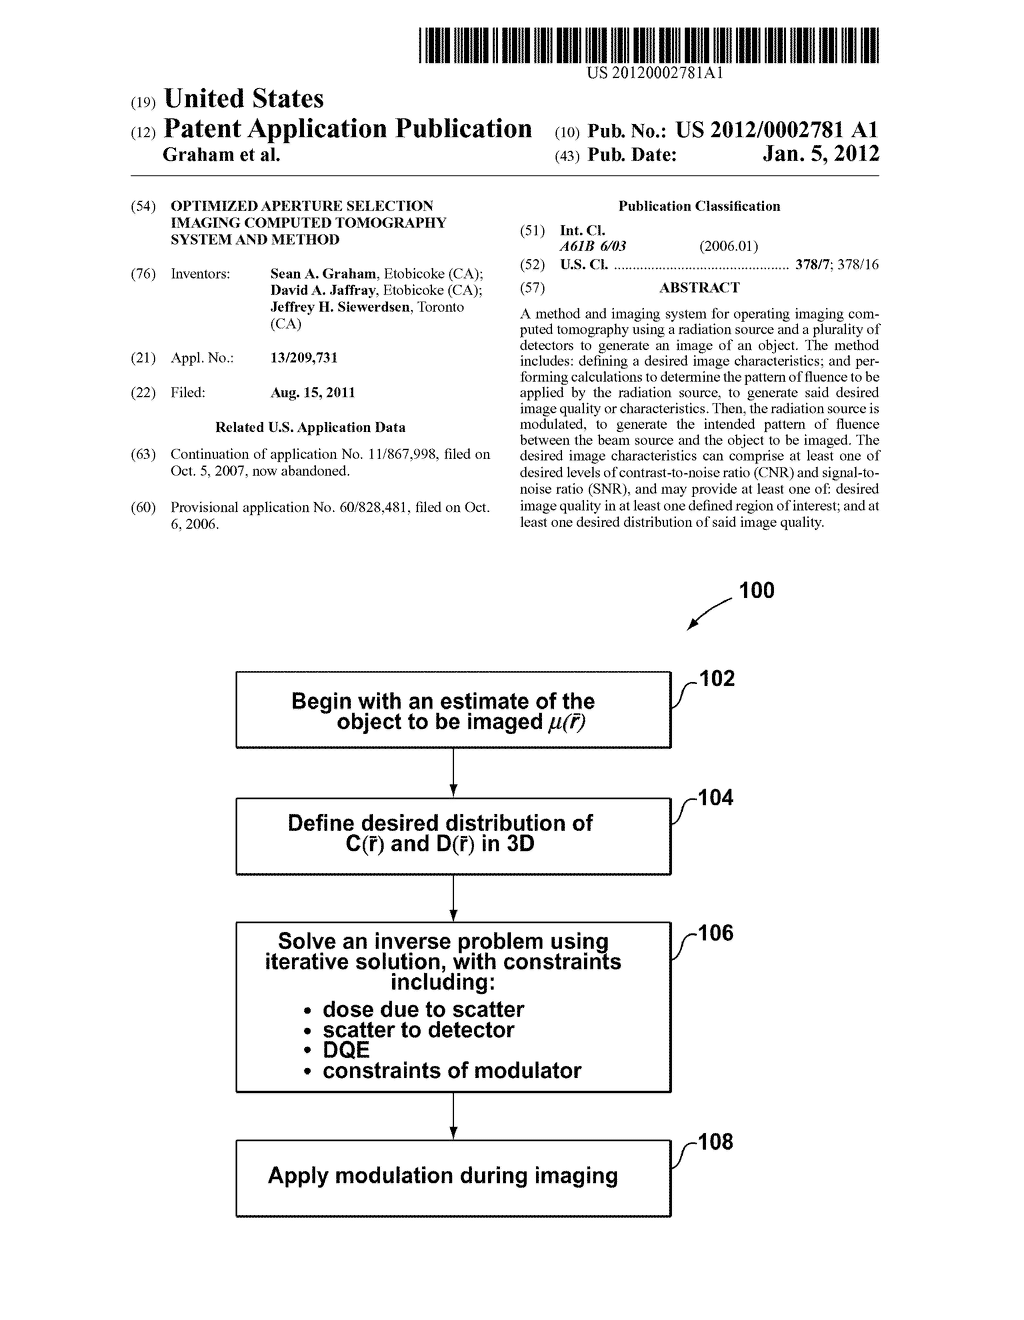 OPTIMIZED APERTURE SELECTION IMAGING COMPUTED TOMOGRAPHY SYSTEM AND METHOD - diagram, schematic, and image 01